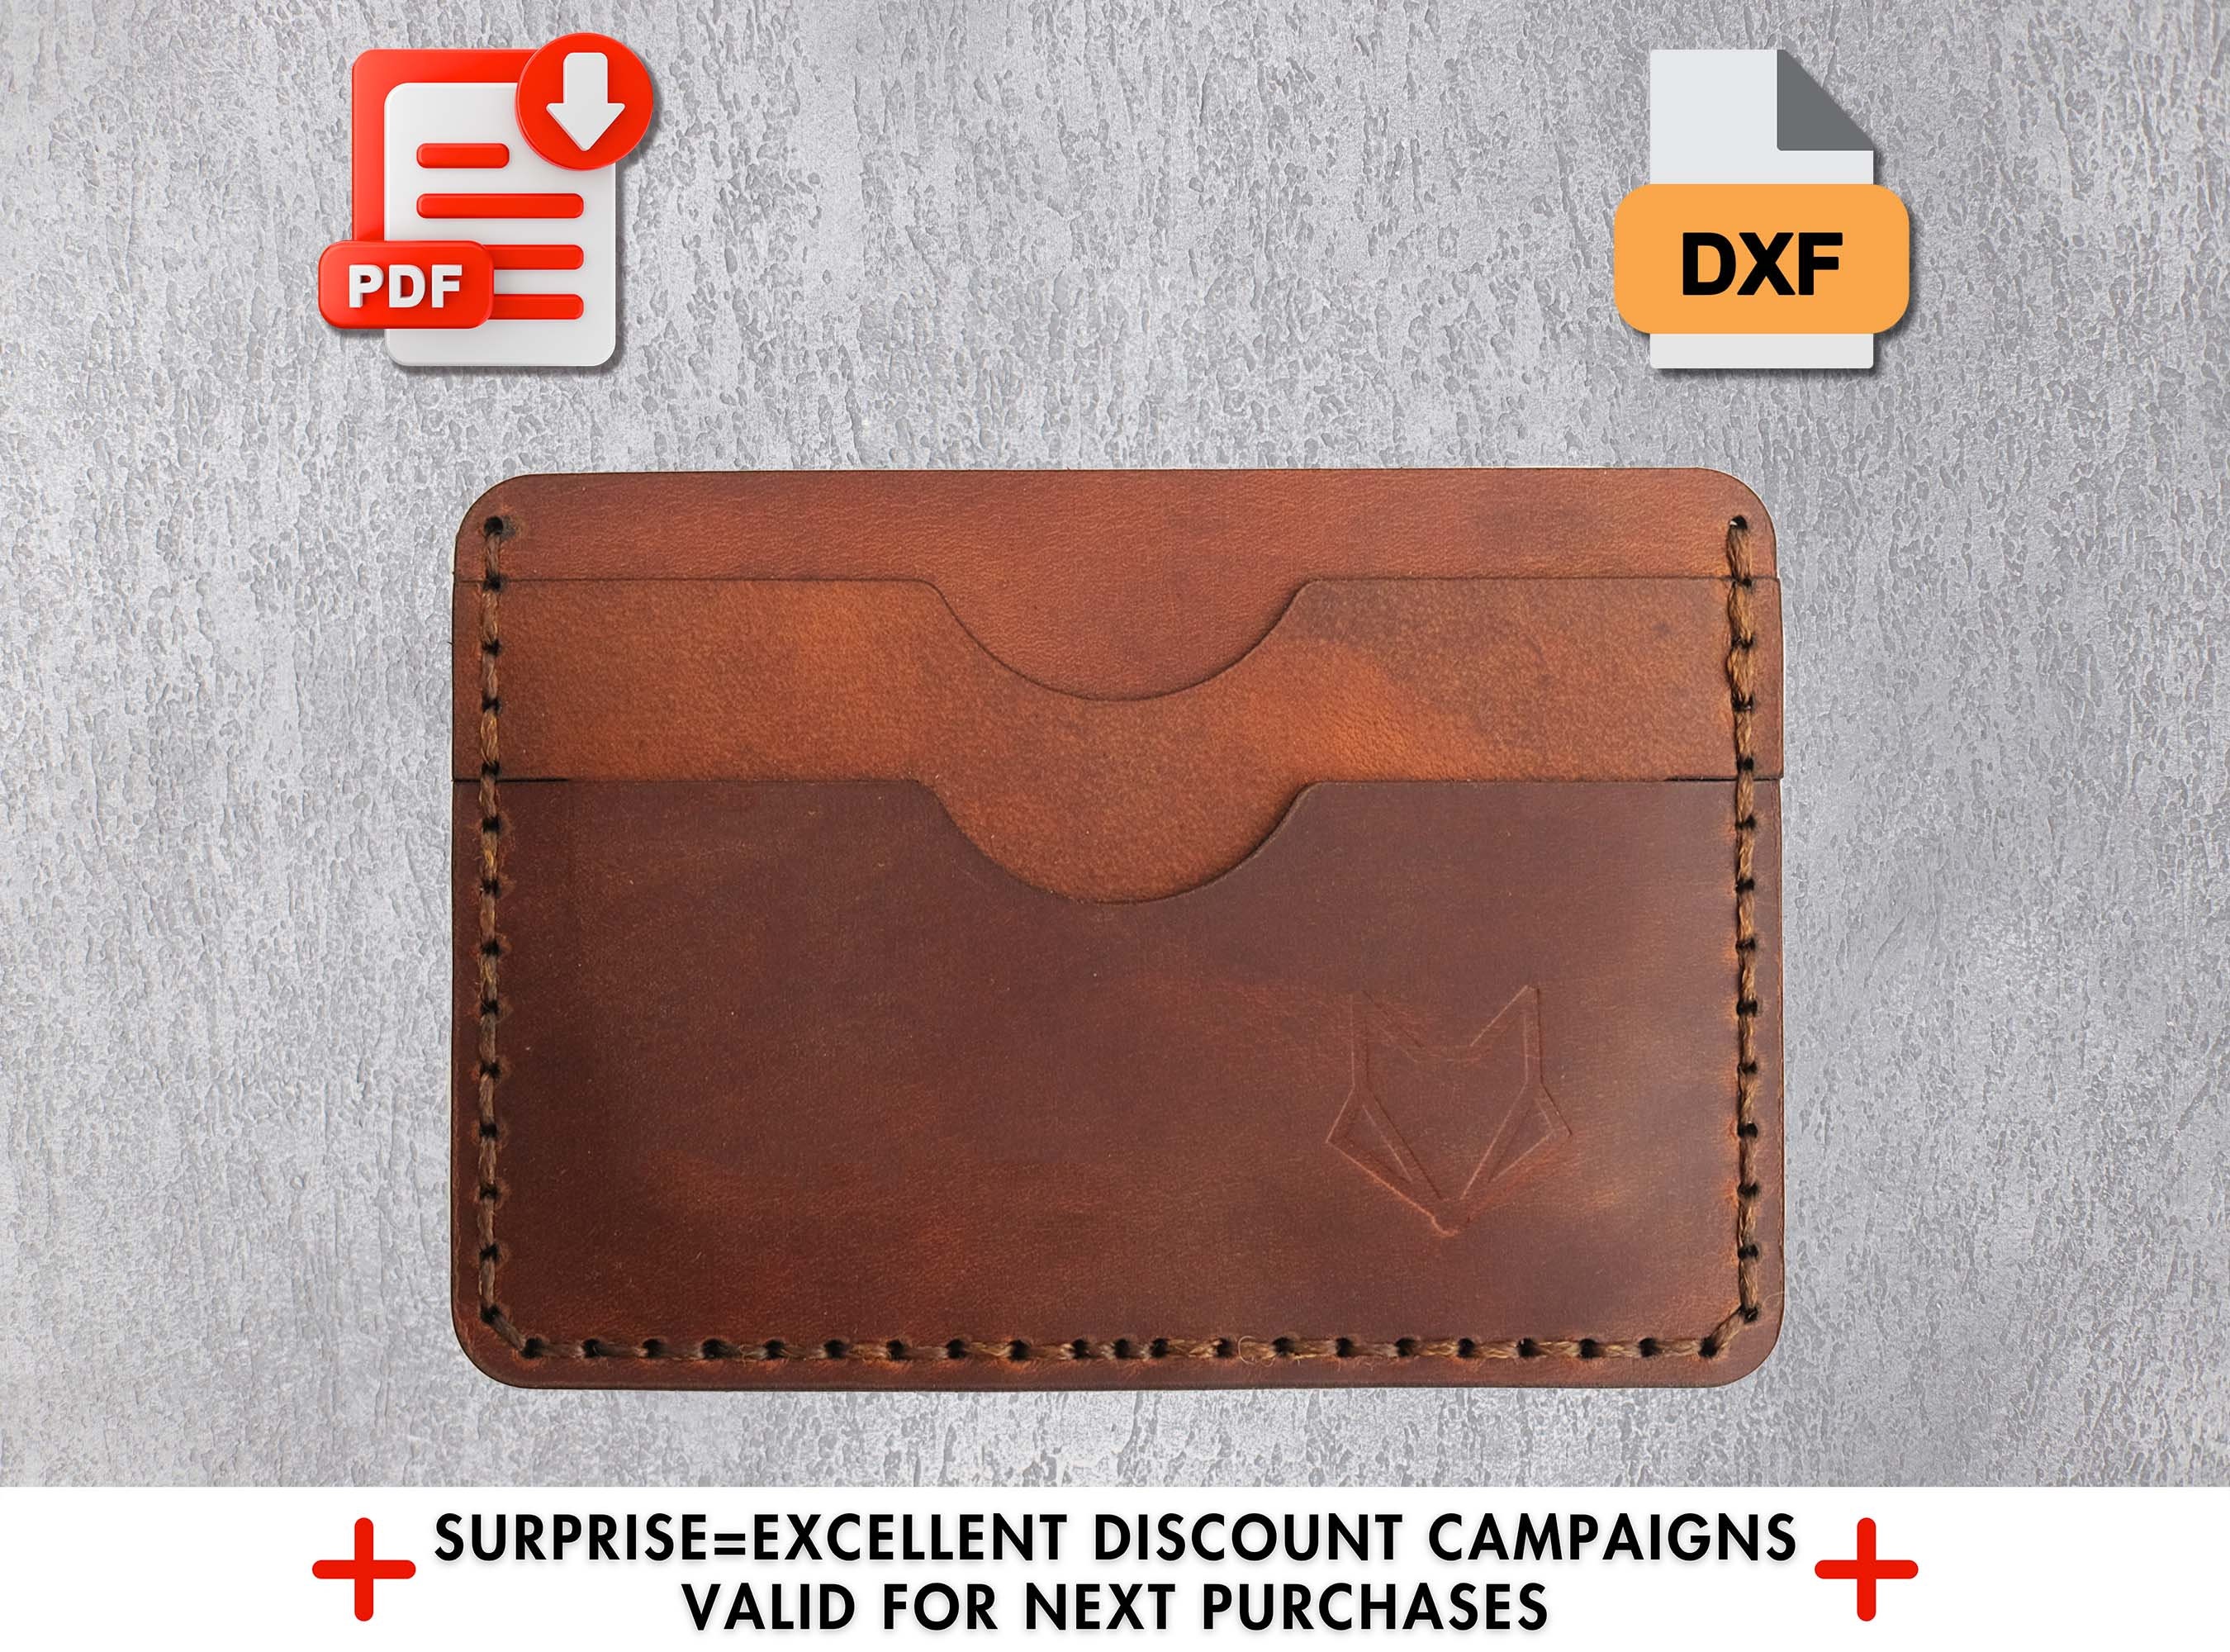 RIVEENY Leather Patterns Templates,Card Holder Acrylic Template Bag Leather  Pattern Acrylic Leather Pattern Leather Templates for Card Bag (Style-A)